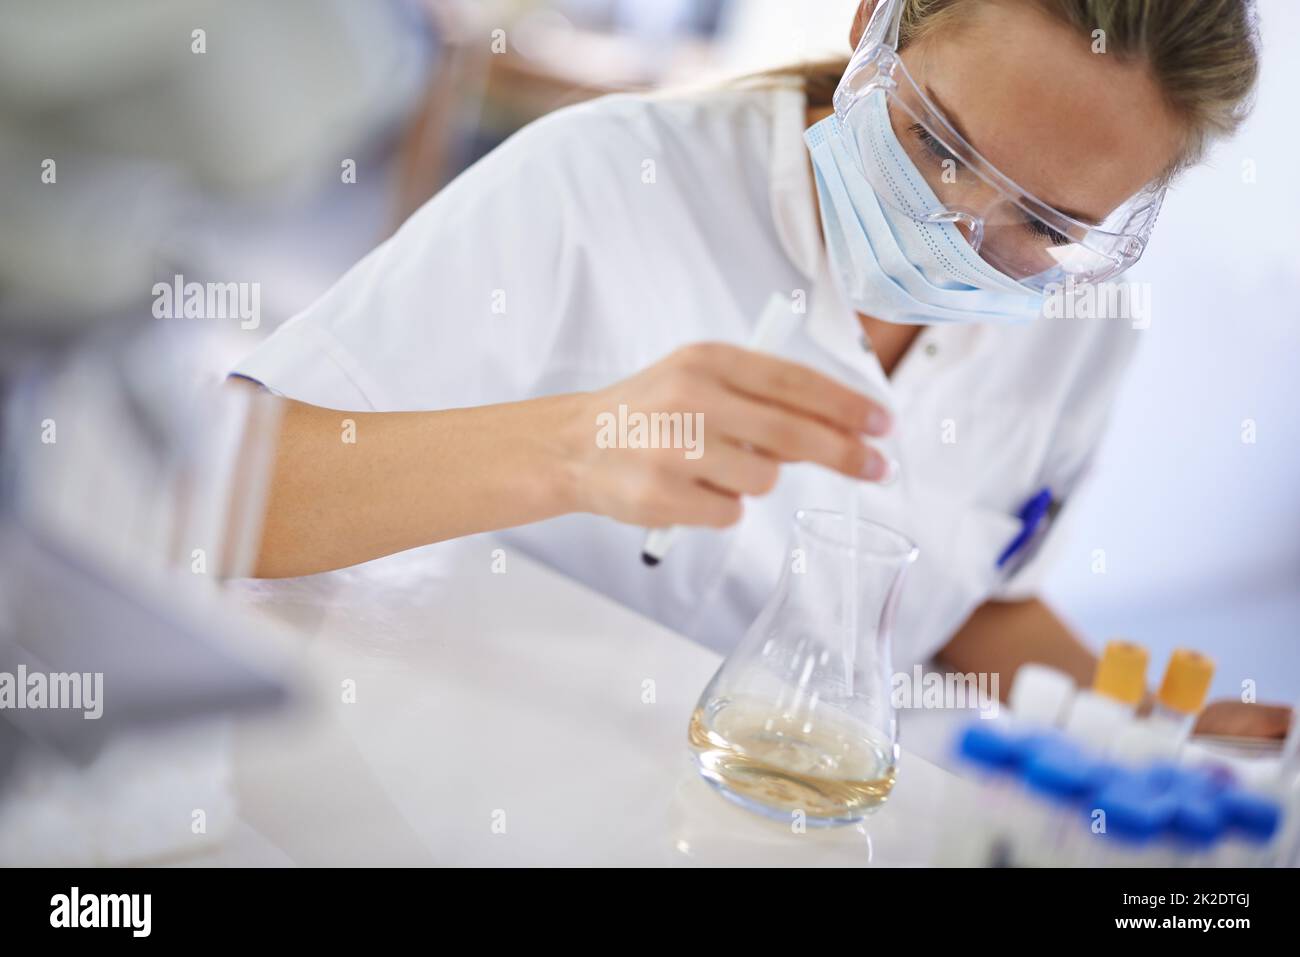 Careful, meticulous work. A young scientist conducting an experiment in her lab. Stock Photo